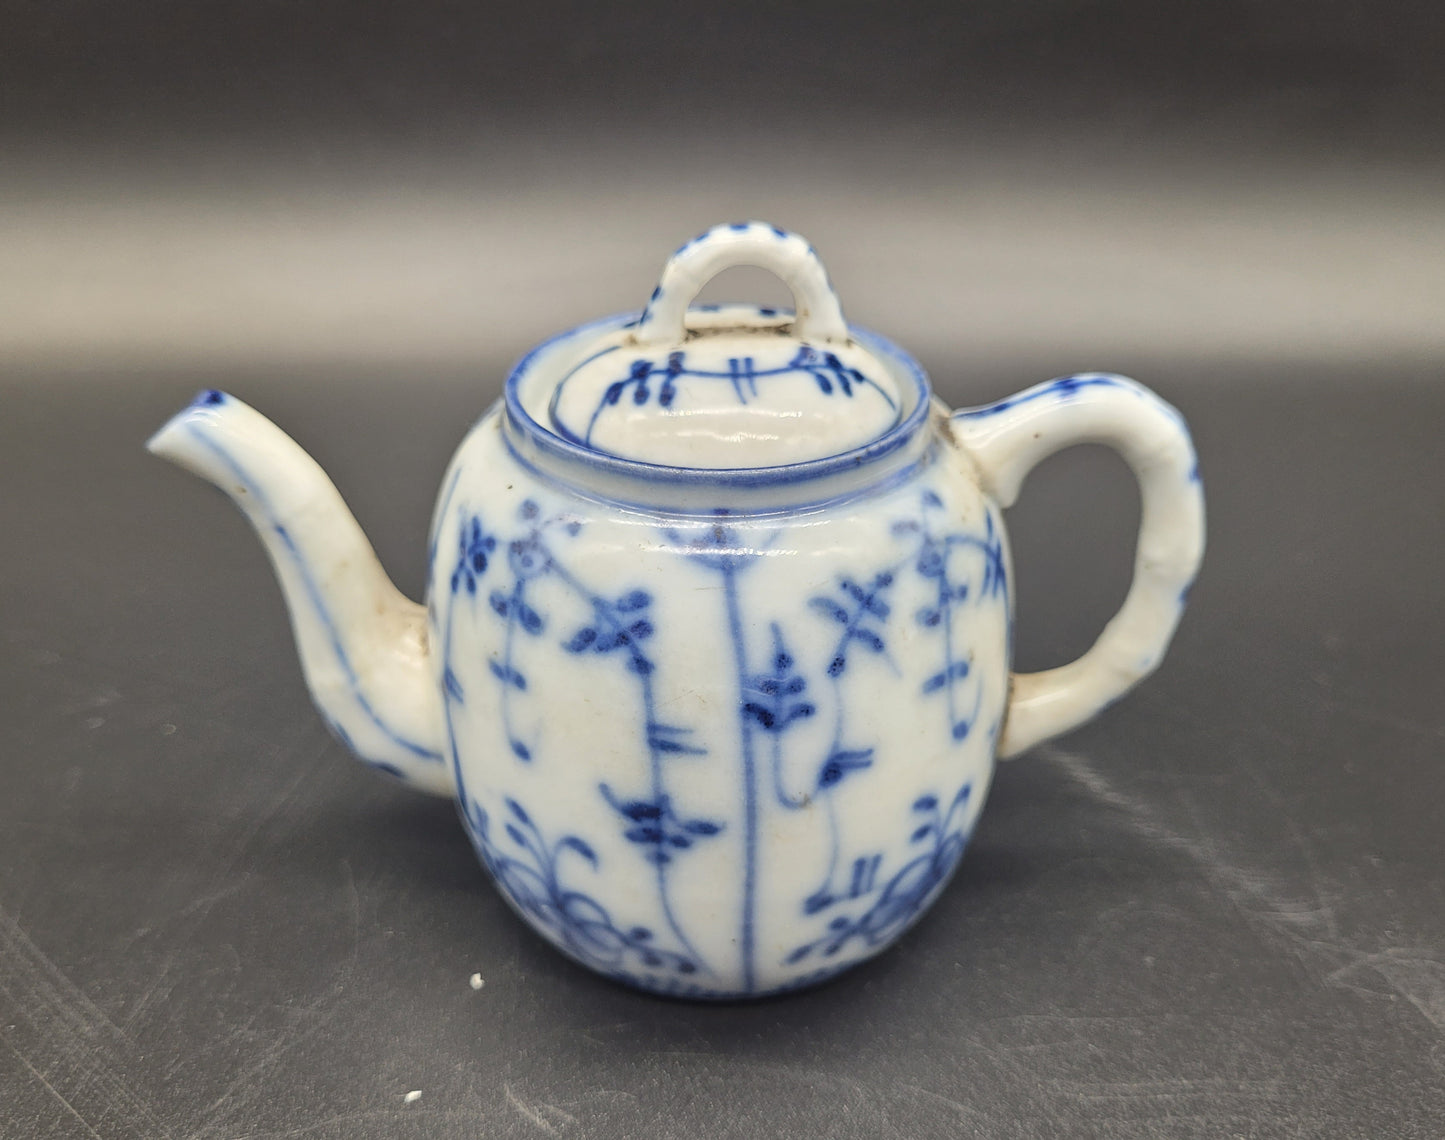 Antique Miniature Chinese Teapot - Wyler Antiques